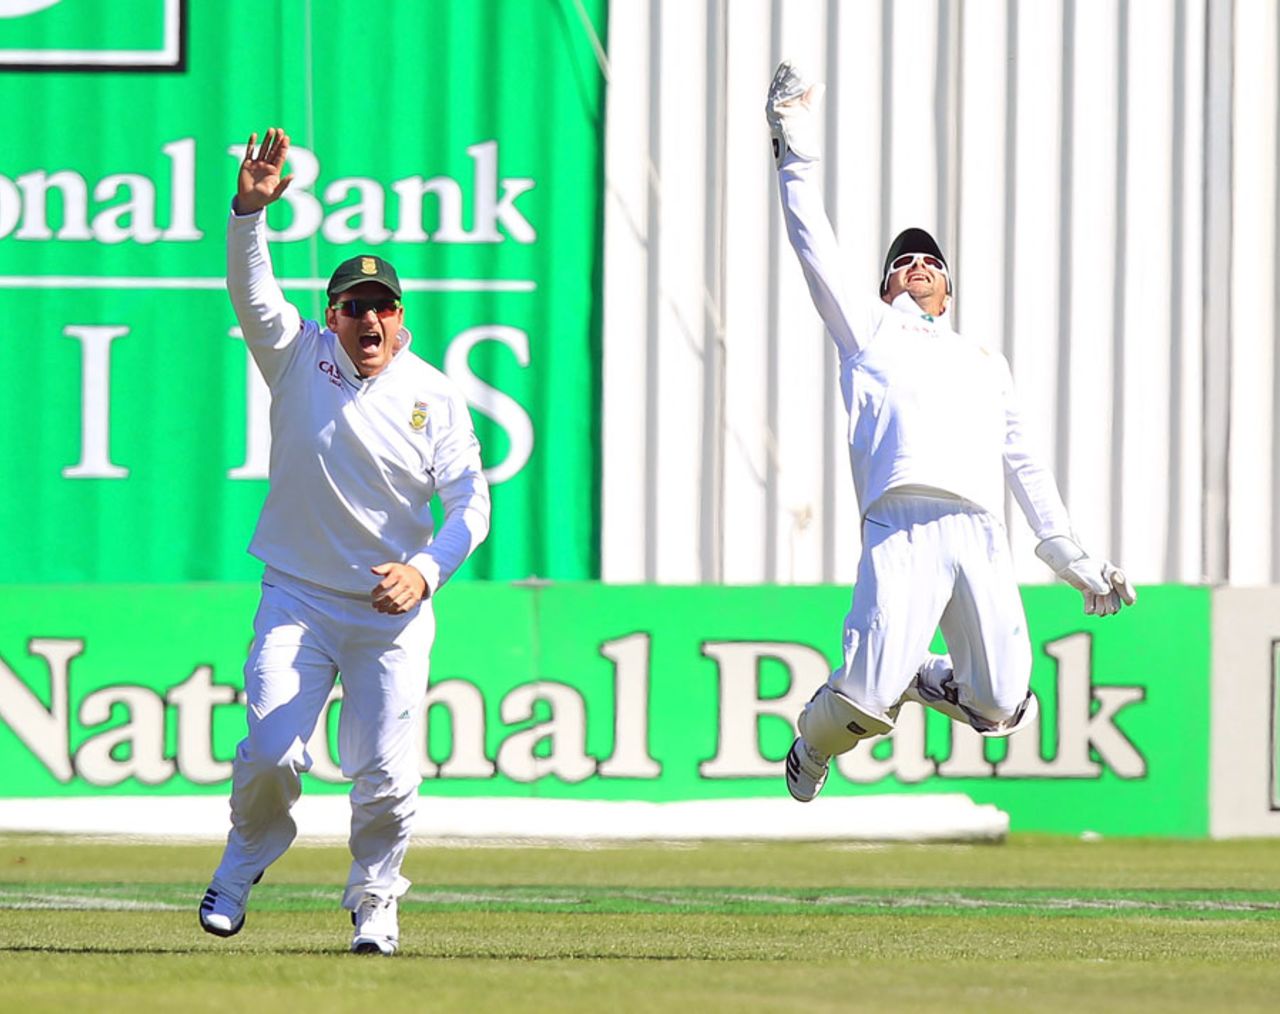 Graeme Smith and Mark Boucher are thrilled after Ross Taylor edges behind, New Zealand v South Africa, 1st Test, Dunedin, 2nd day, March 8, 2012